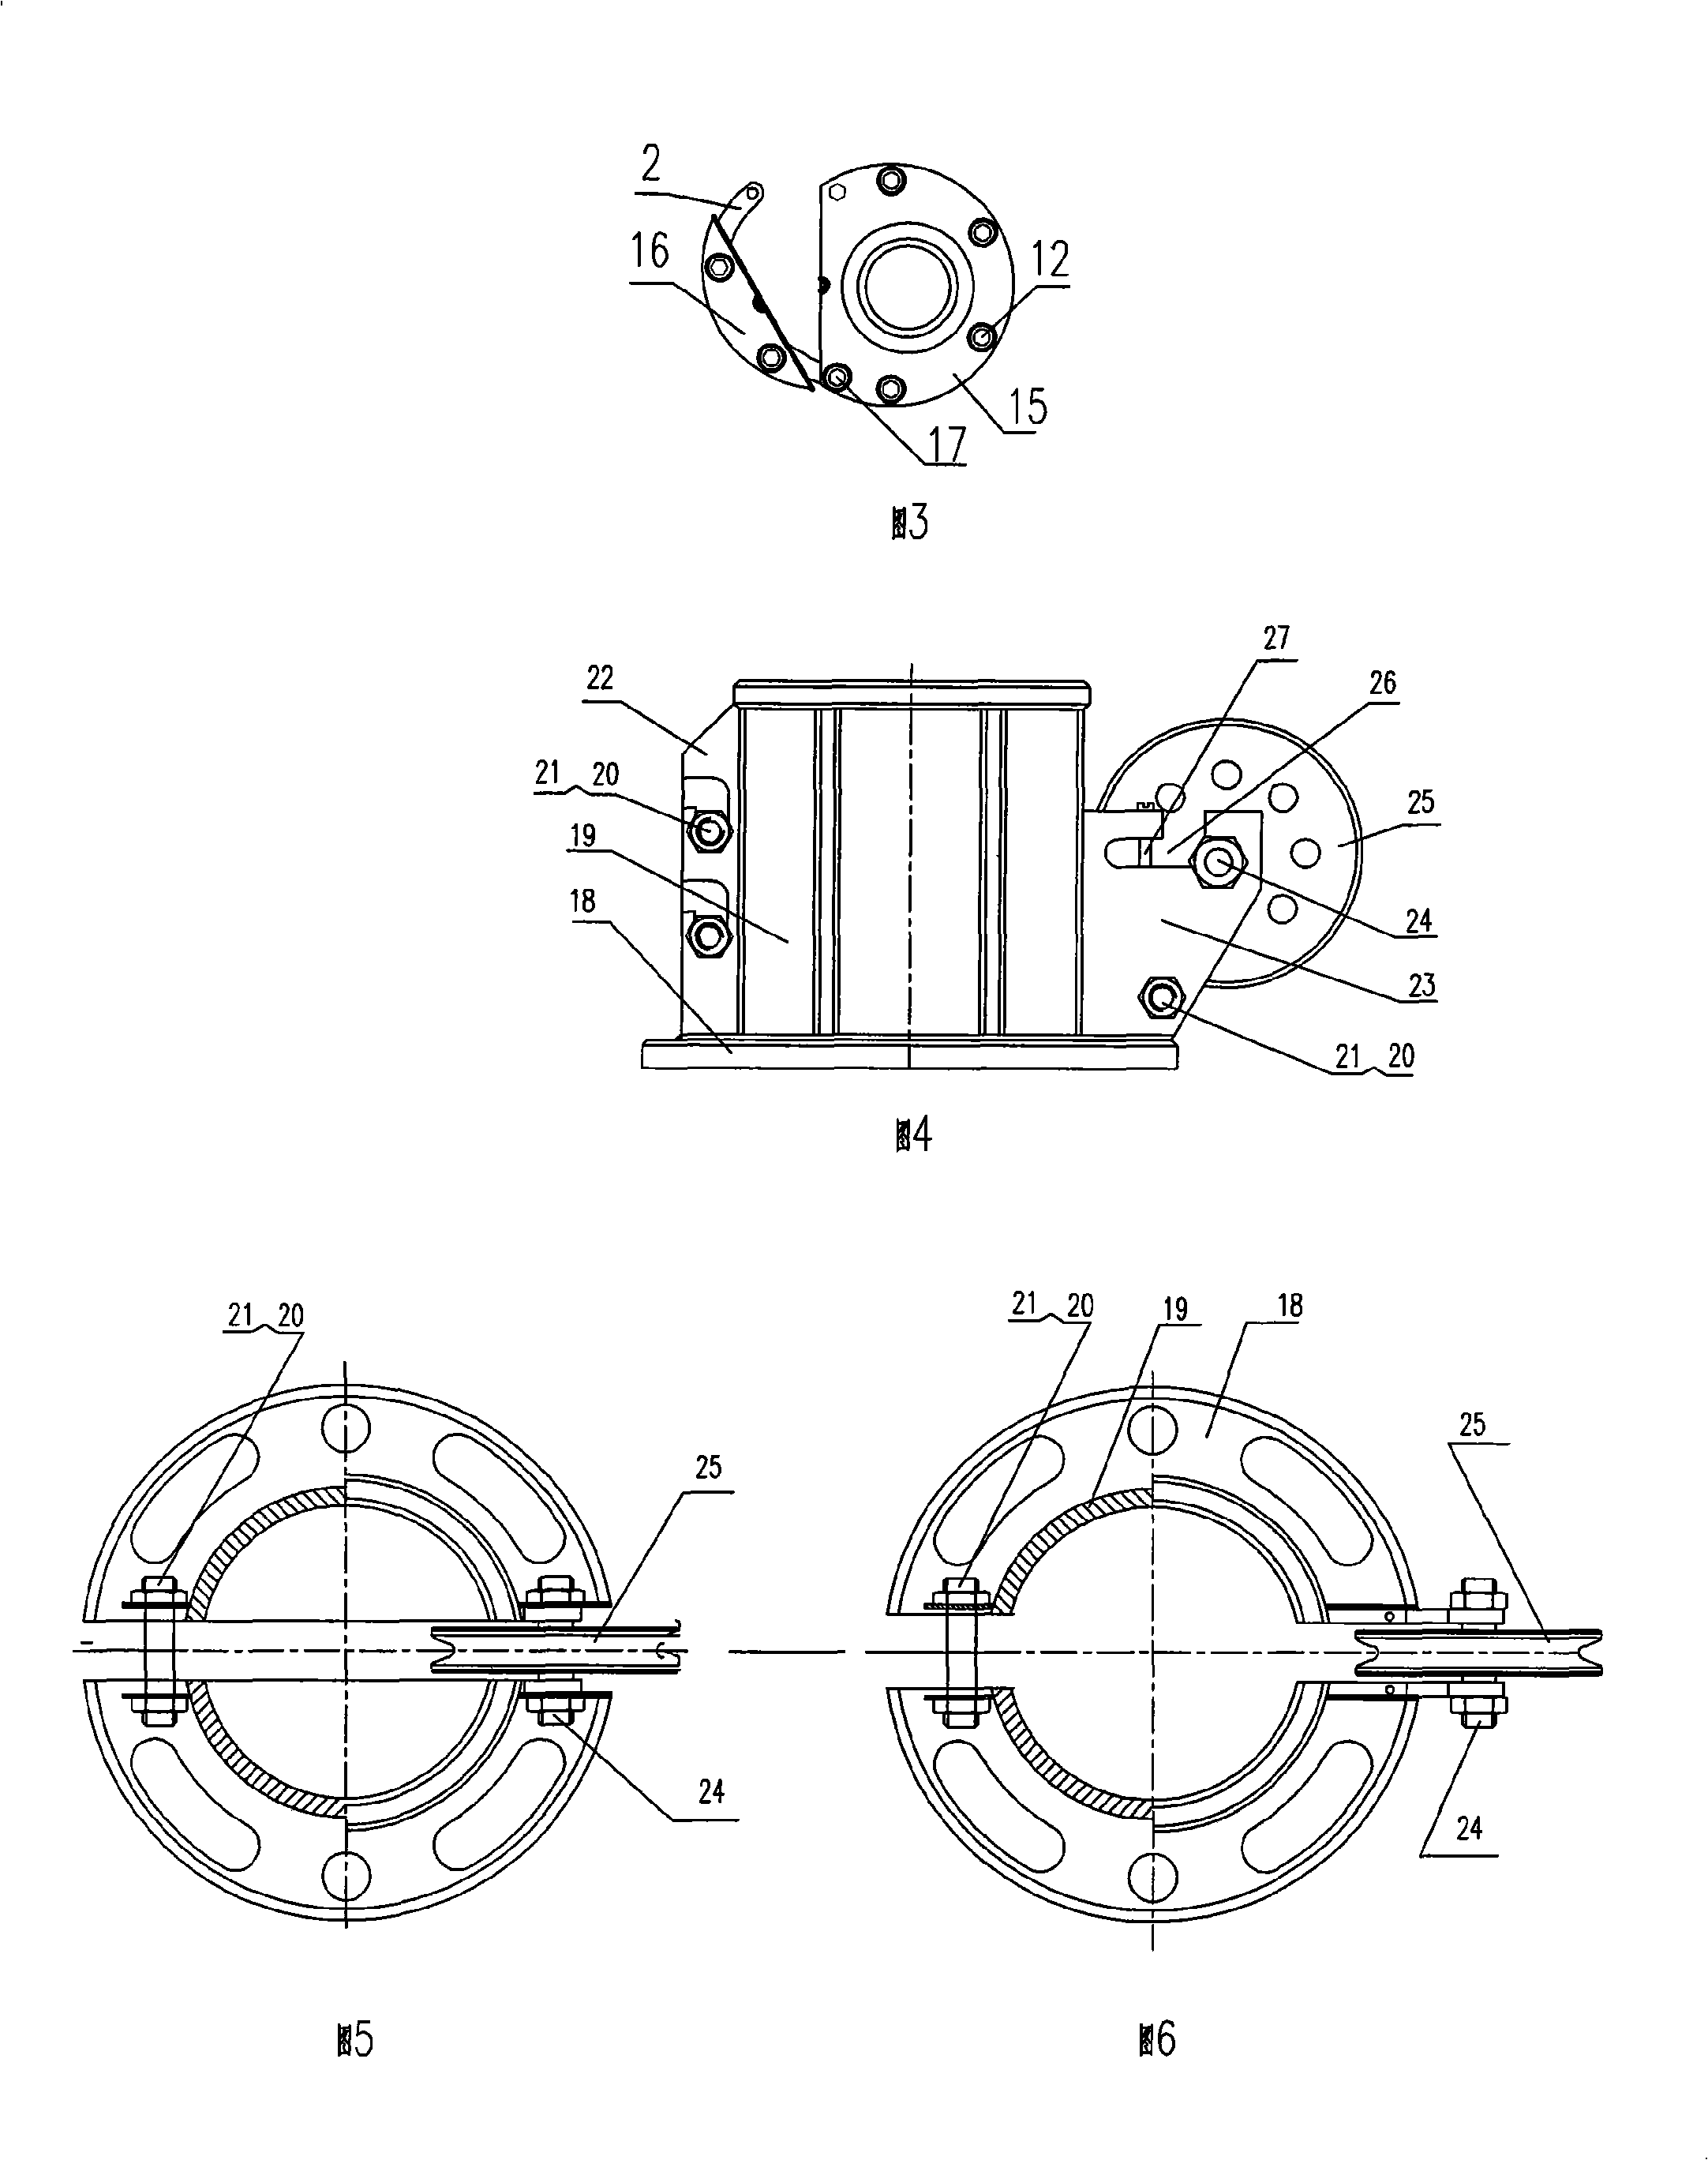 Preset production fluid section plane test method of mechanical mining horizontal well and special shaft mouth test apparatus